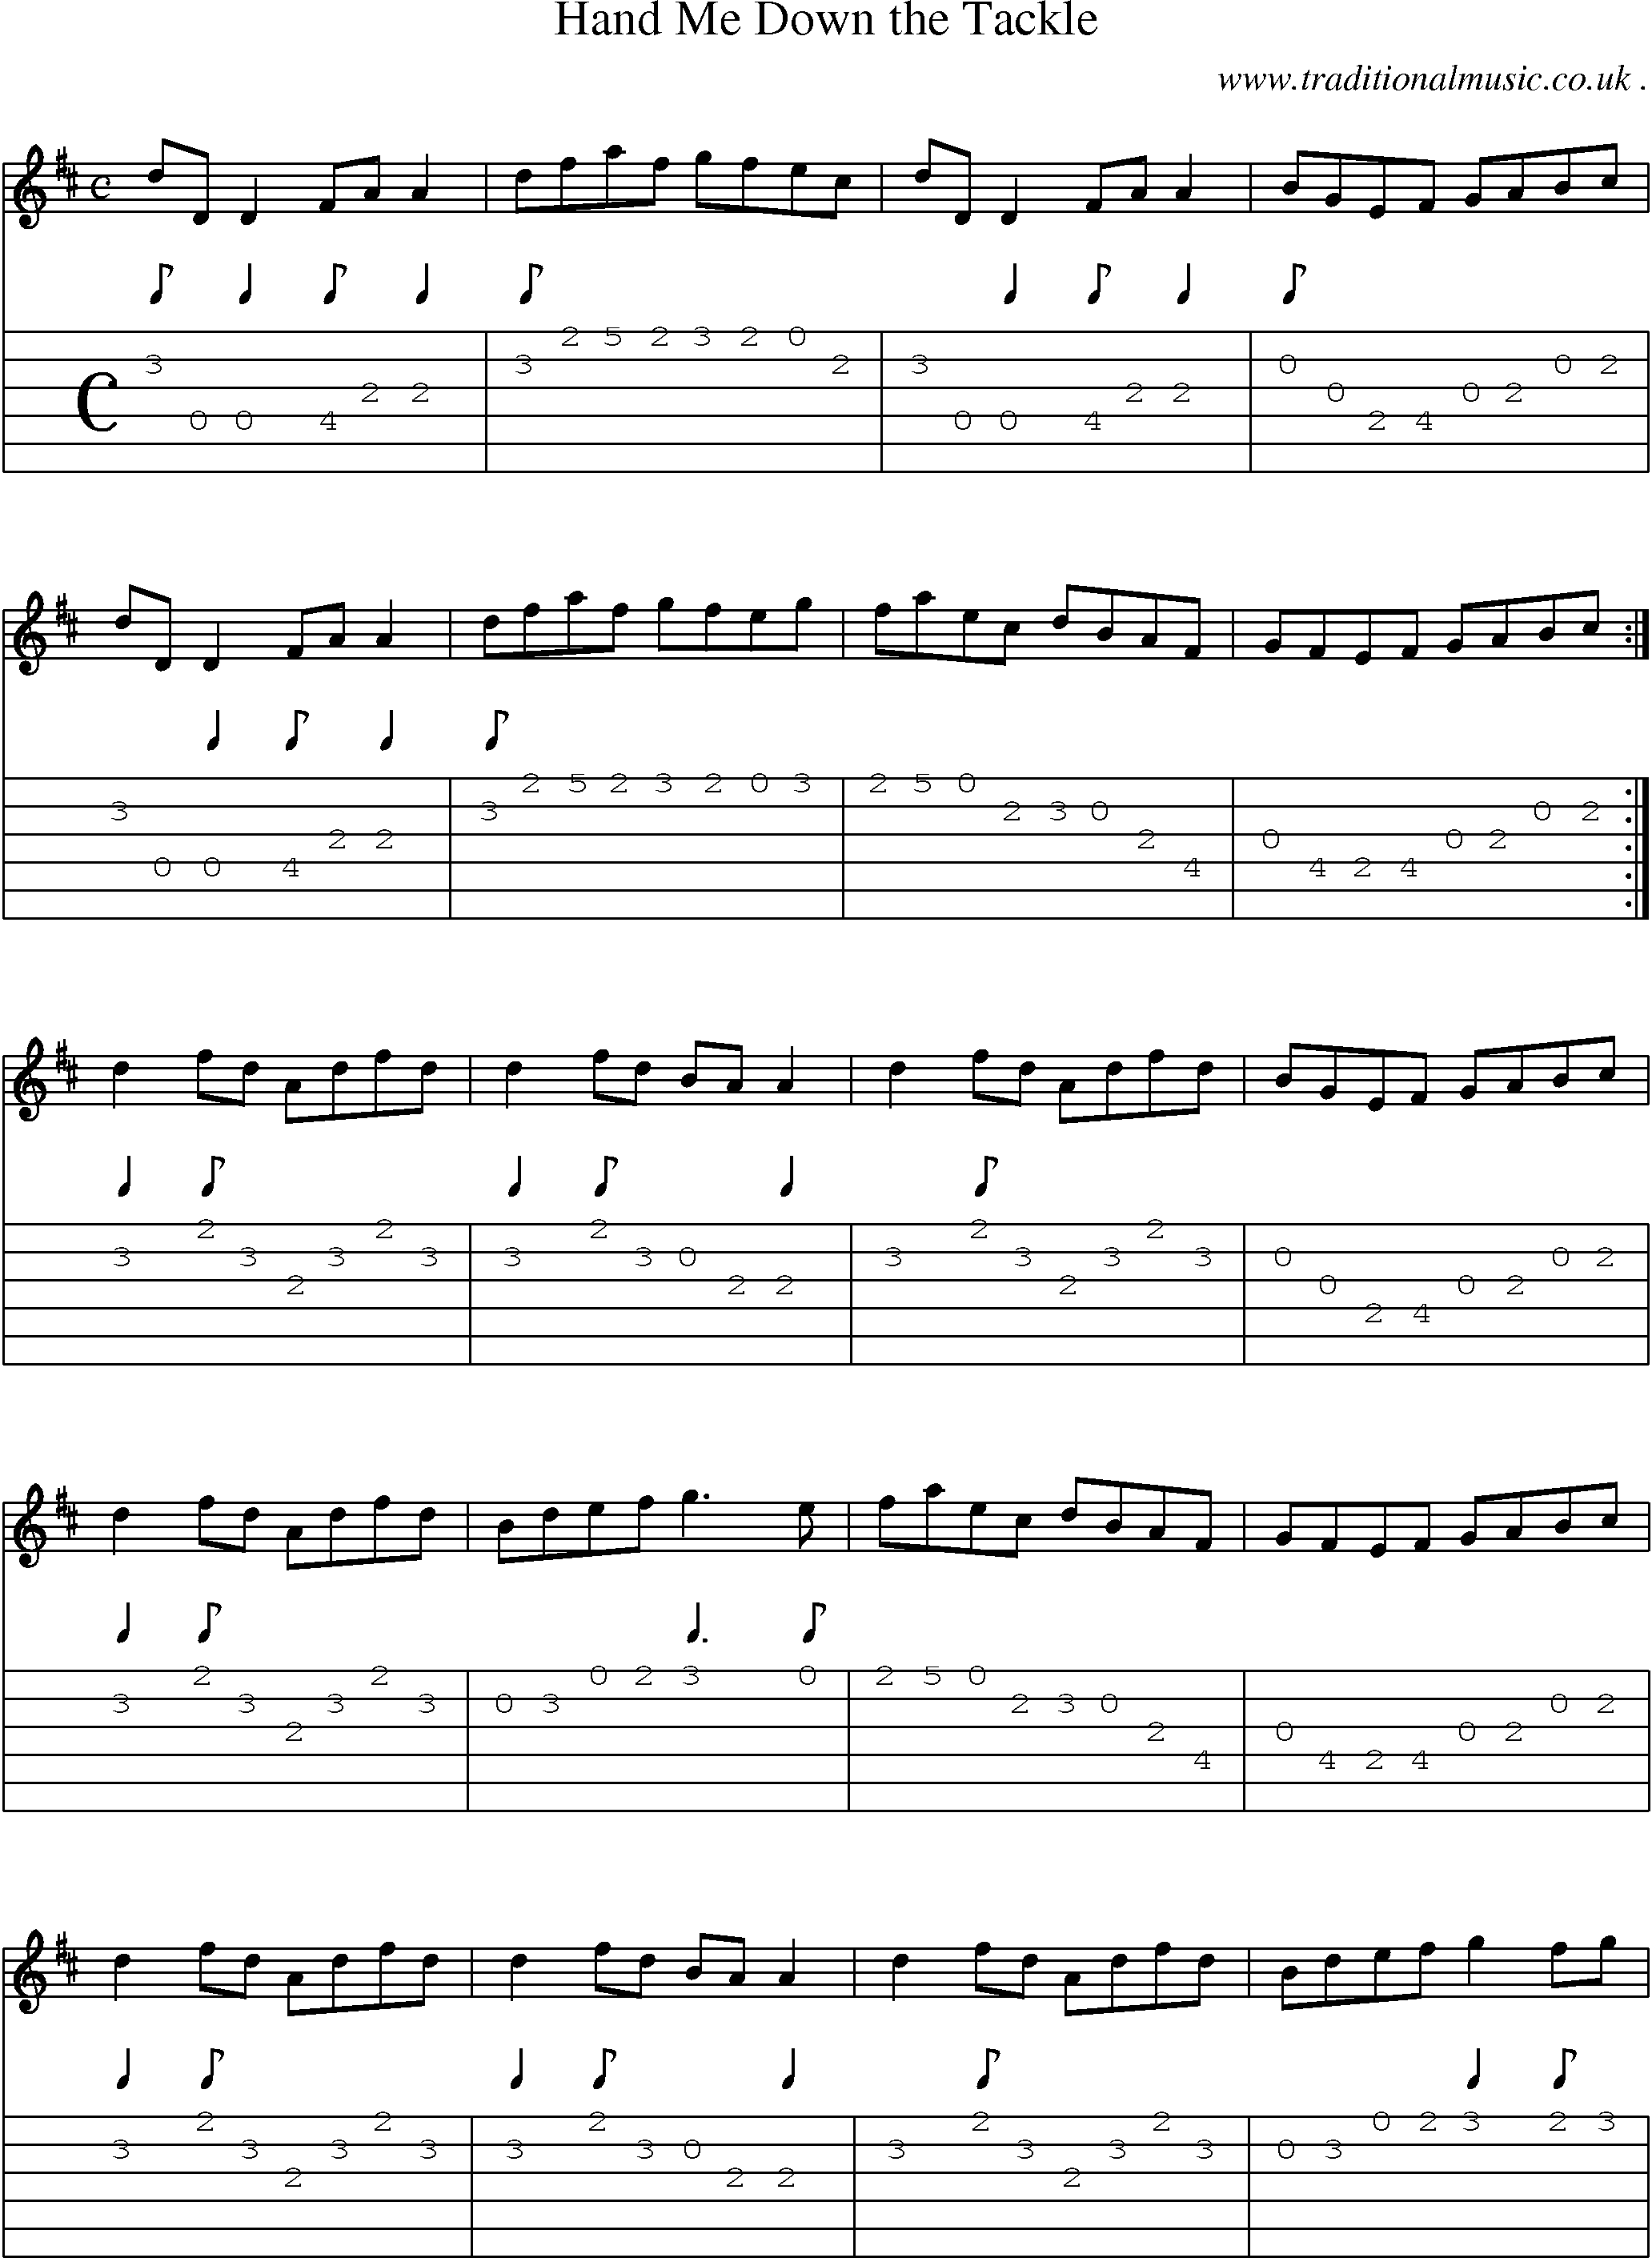 Sheet-Music and Guitar Tabs for Hand Me Down The Tackle